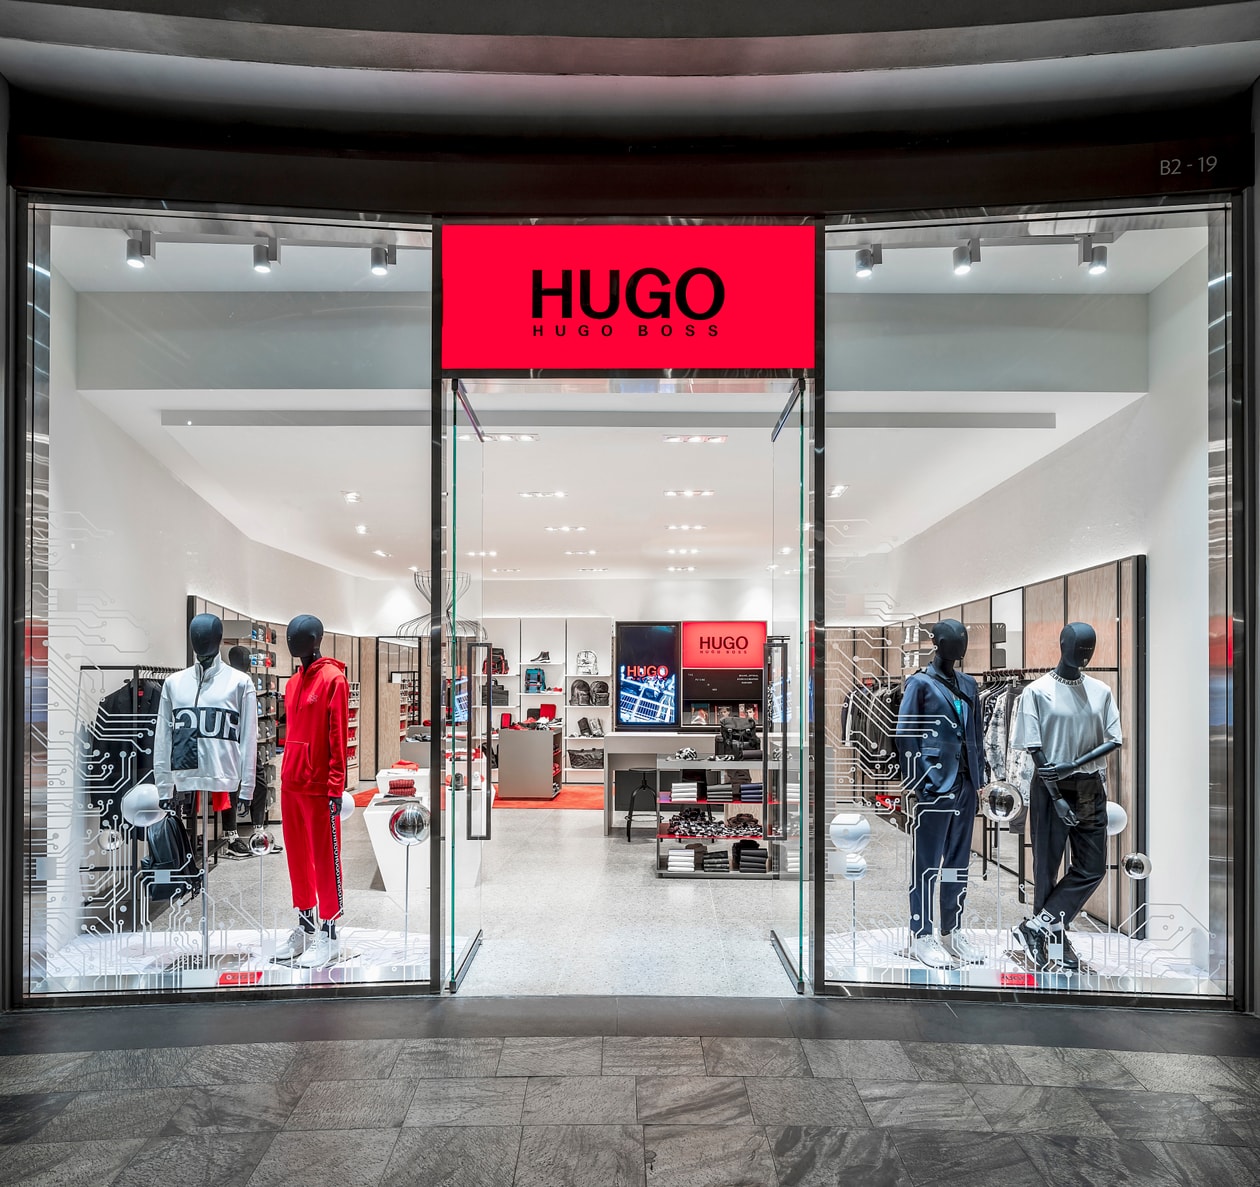 HUGO Expands in Singapore With Second Flagship Store in Marina Bay Sands